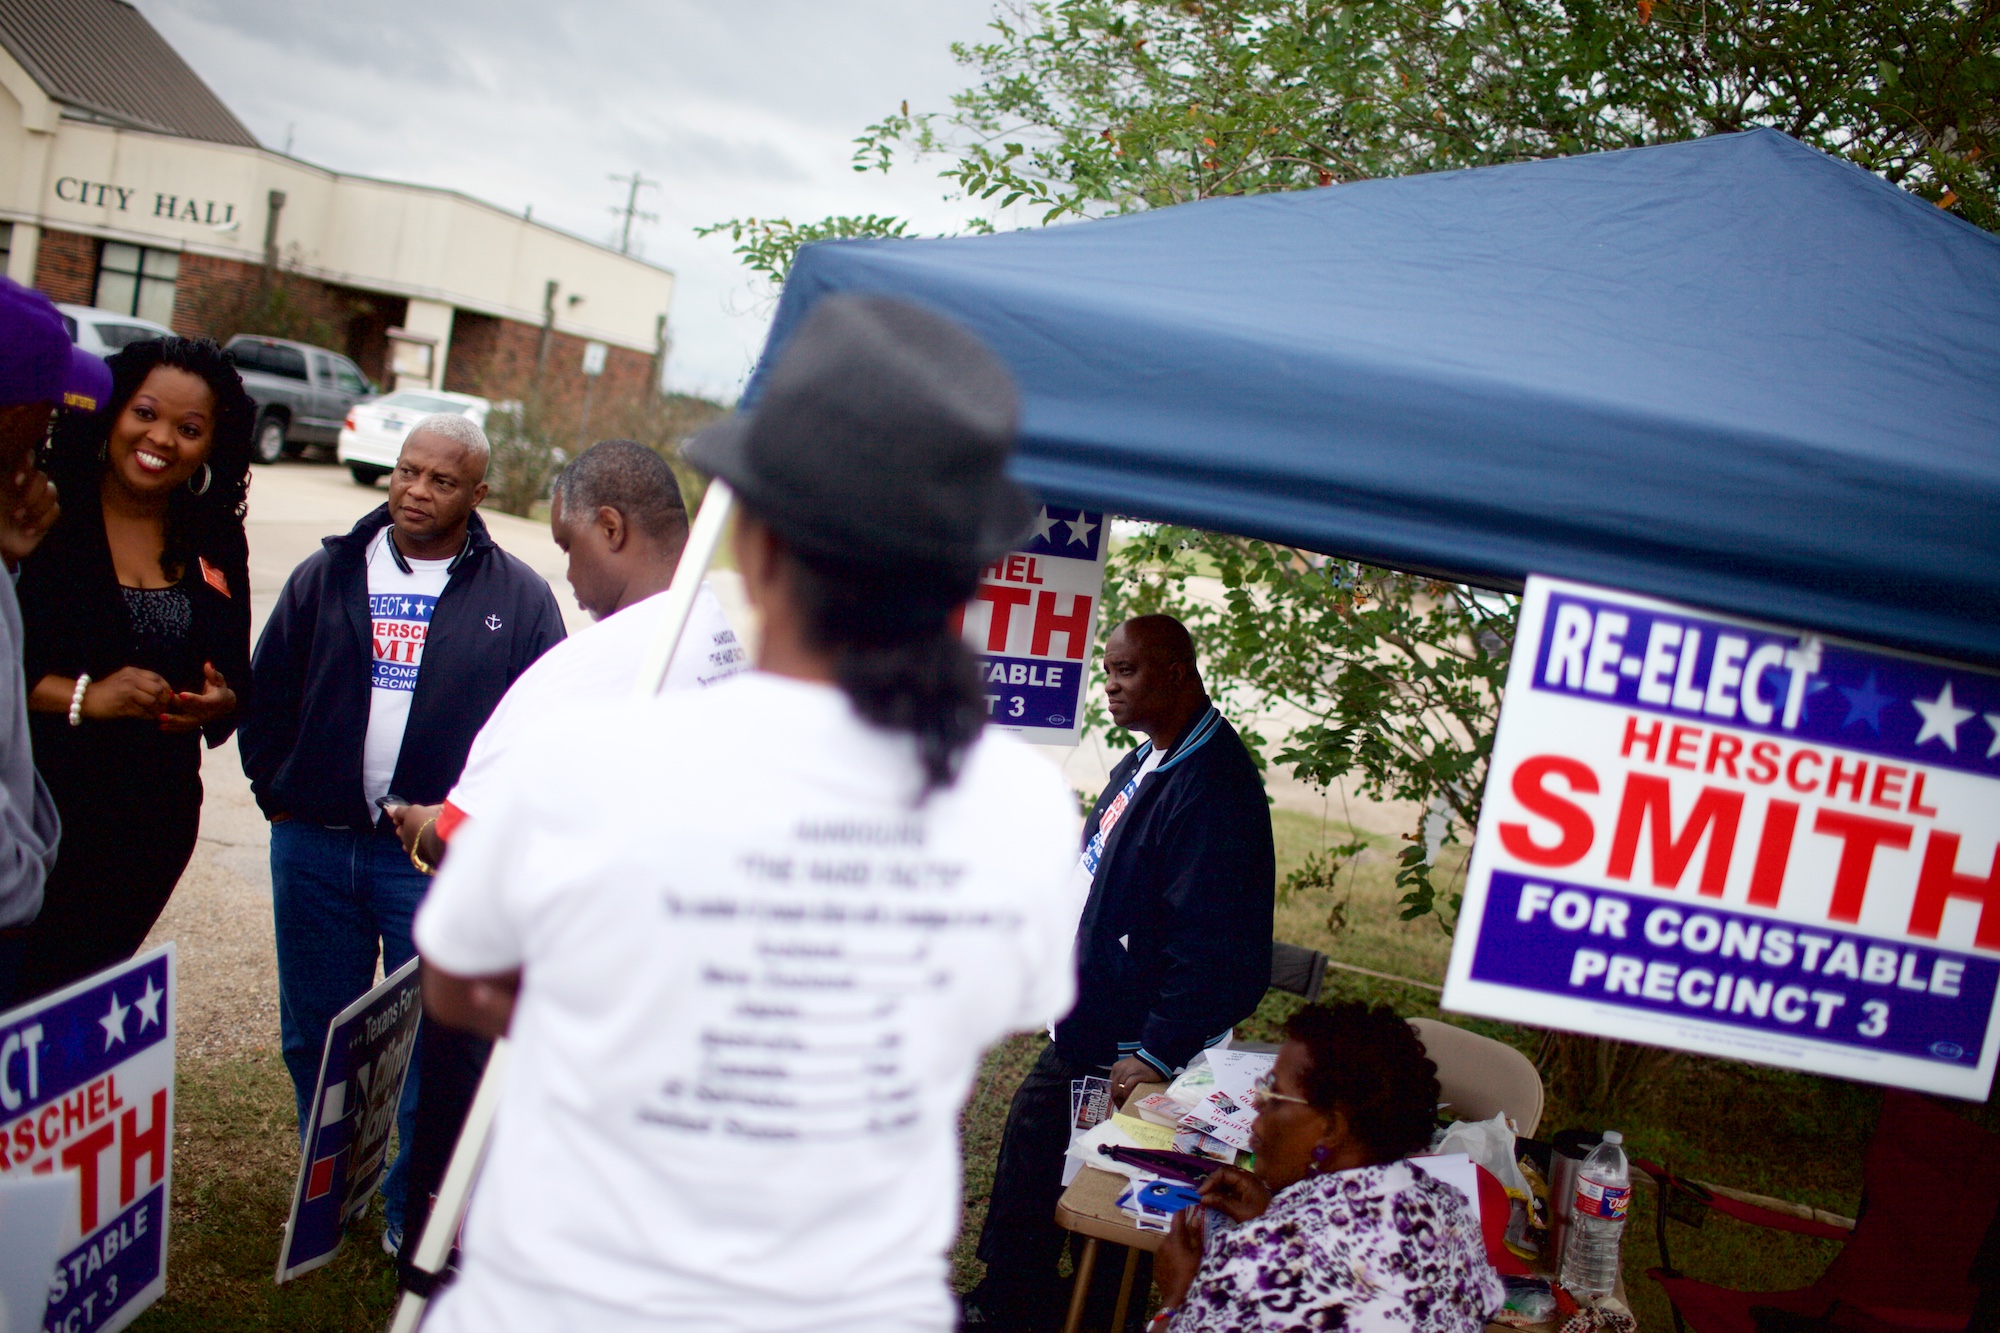 Waller County Constable Herschel Smith with supporters near a polling place in Prairie ViewElection Day 2016 across Texas